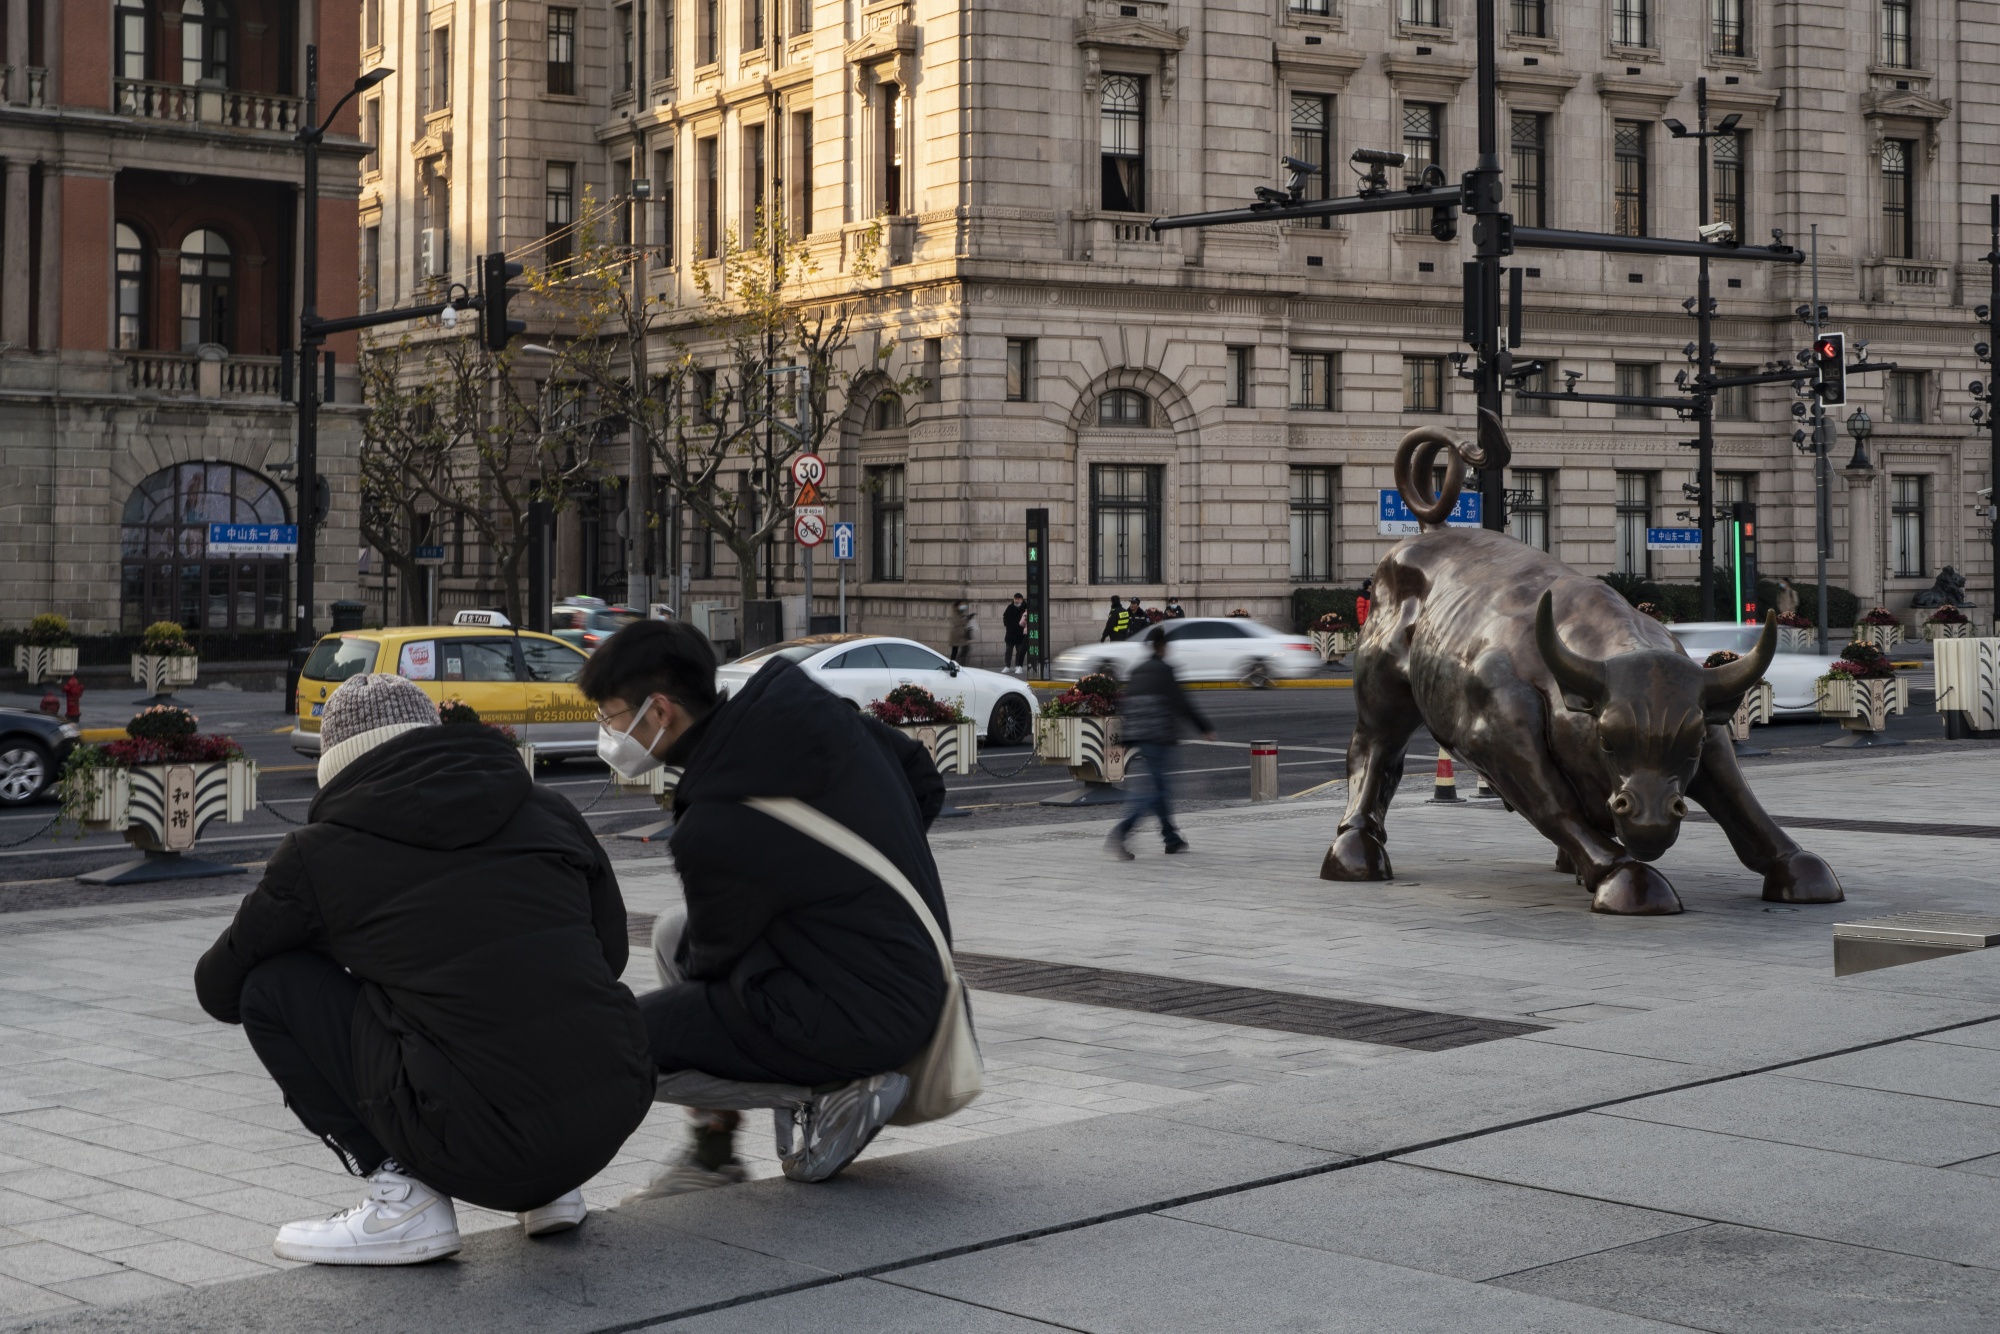 On December 21, two people kneeled near the Bund Bull statue in Shanghai.